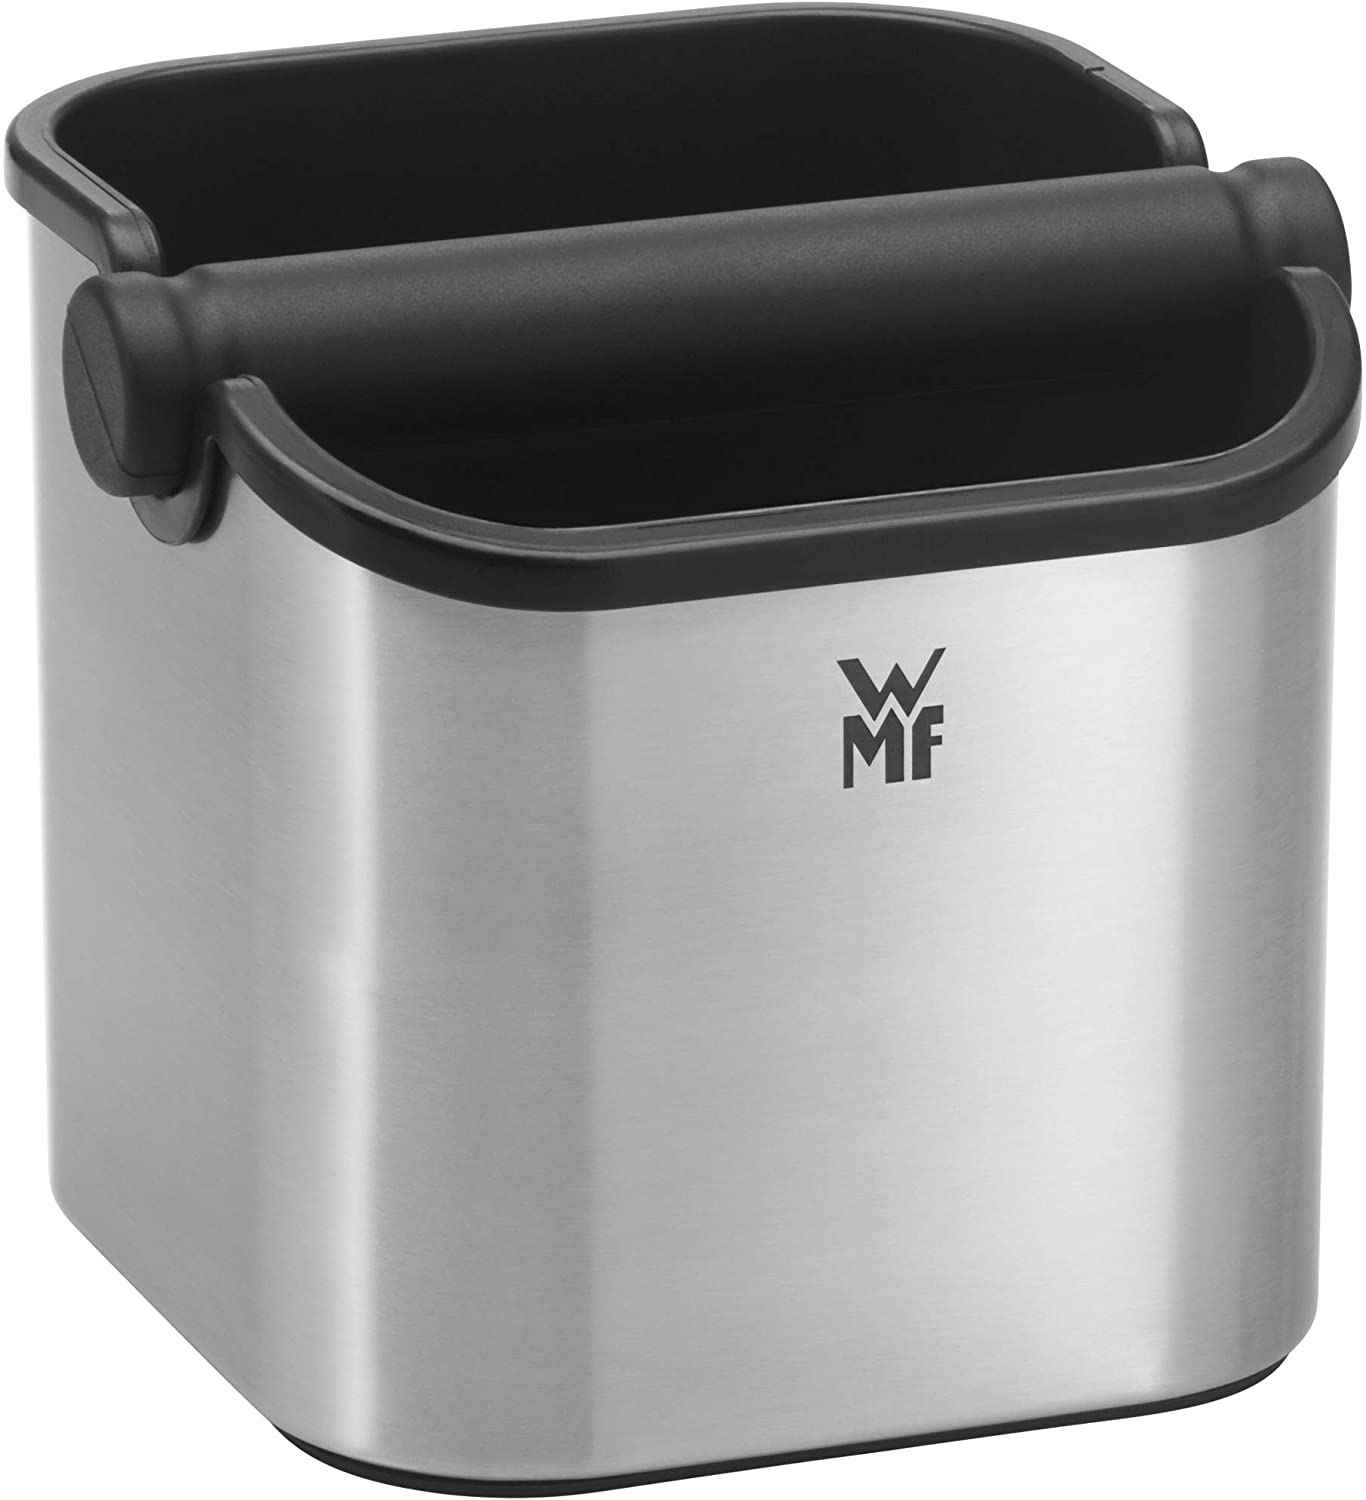 WMF Lumero tee container with knocking bar, accessory for portafilter espresso machine, dishwasher-safe, matte stainless steel